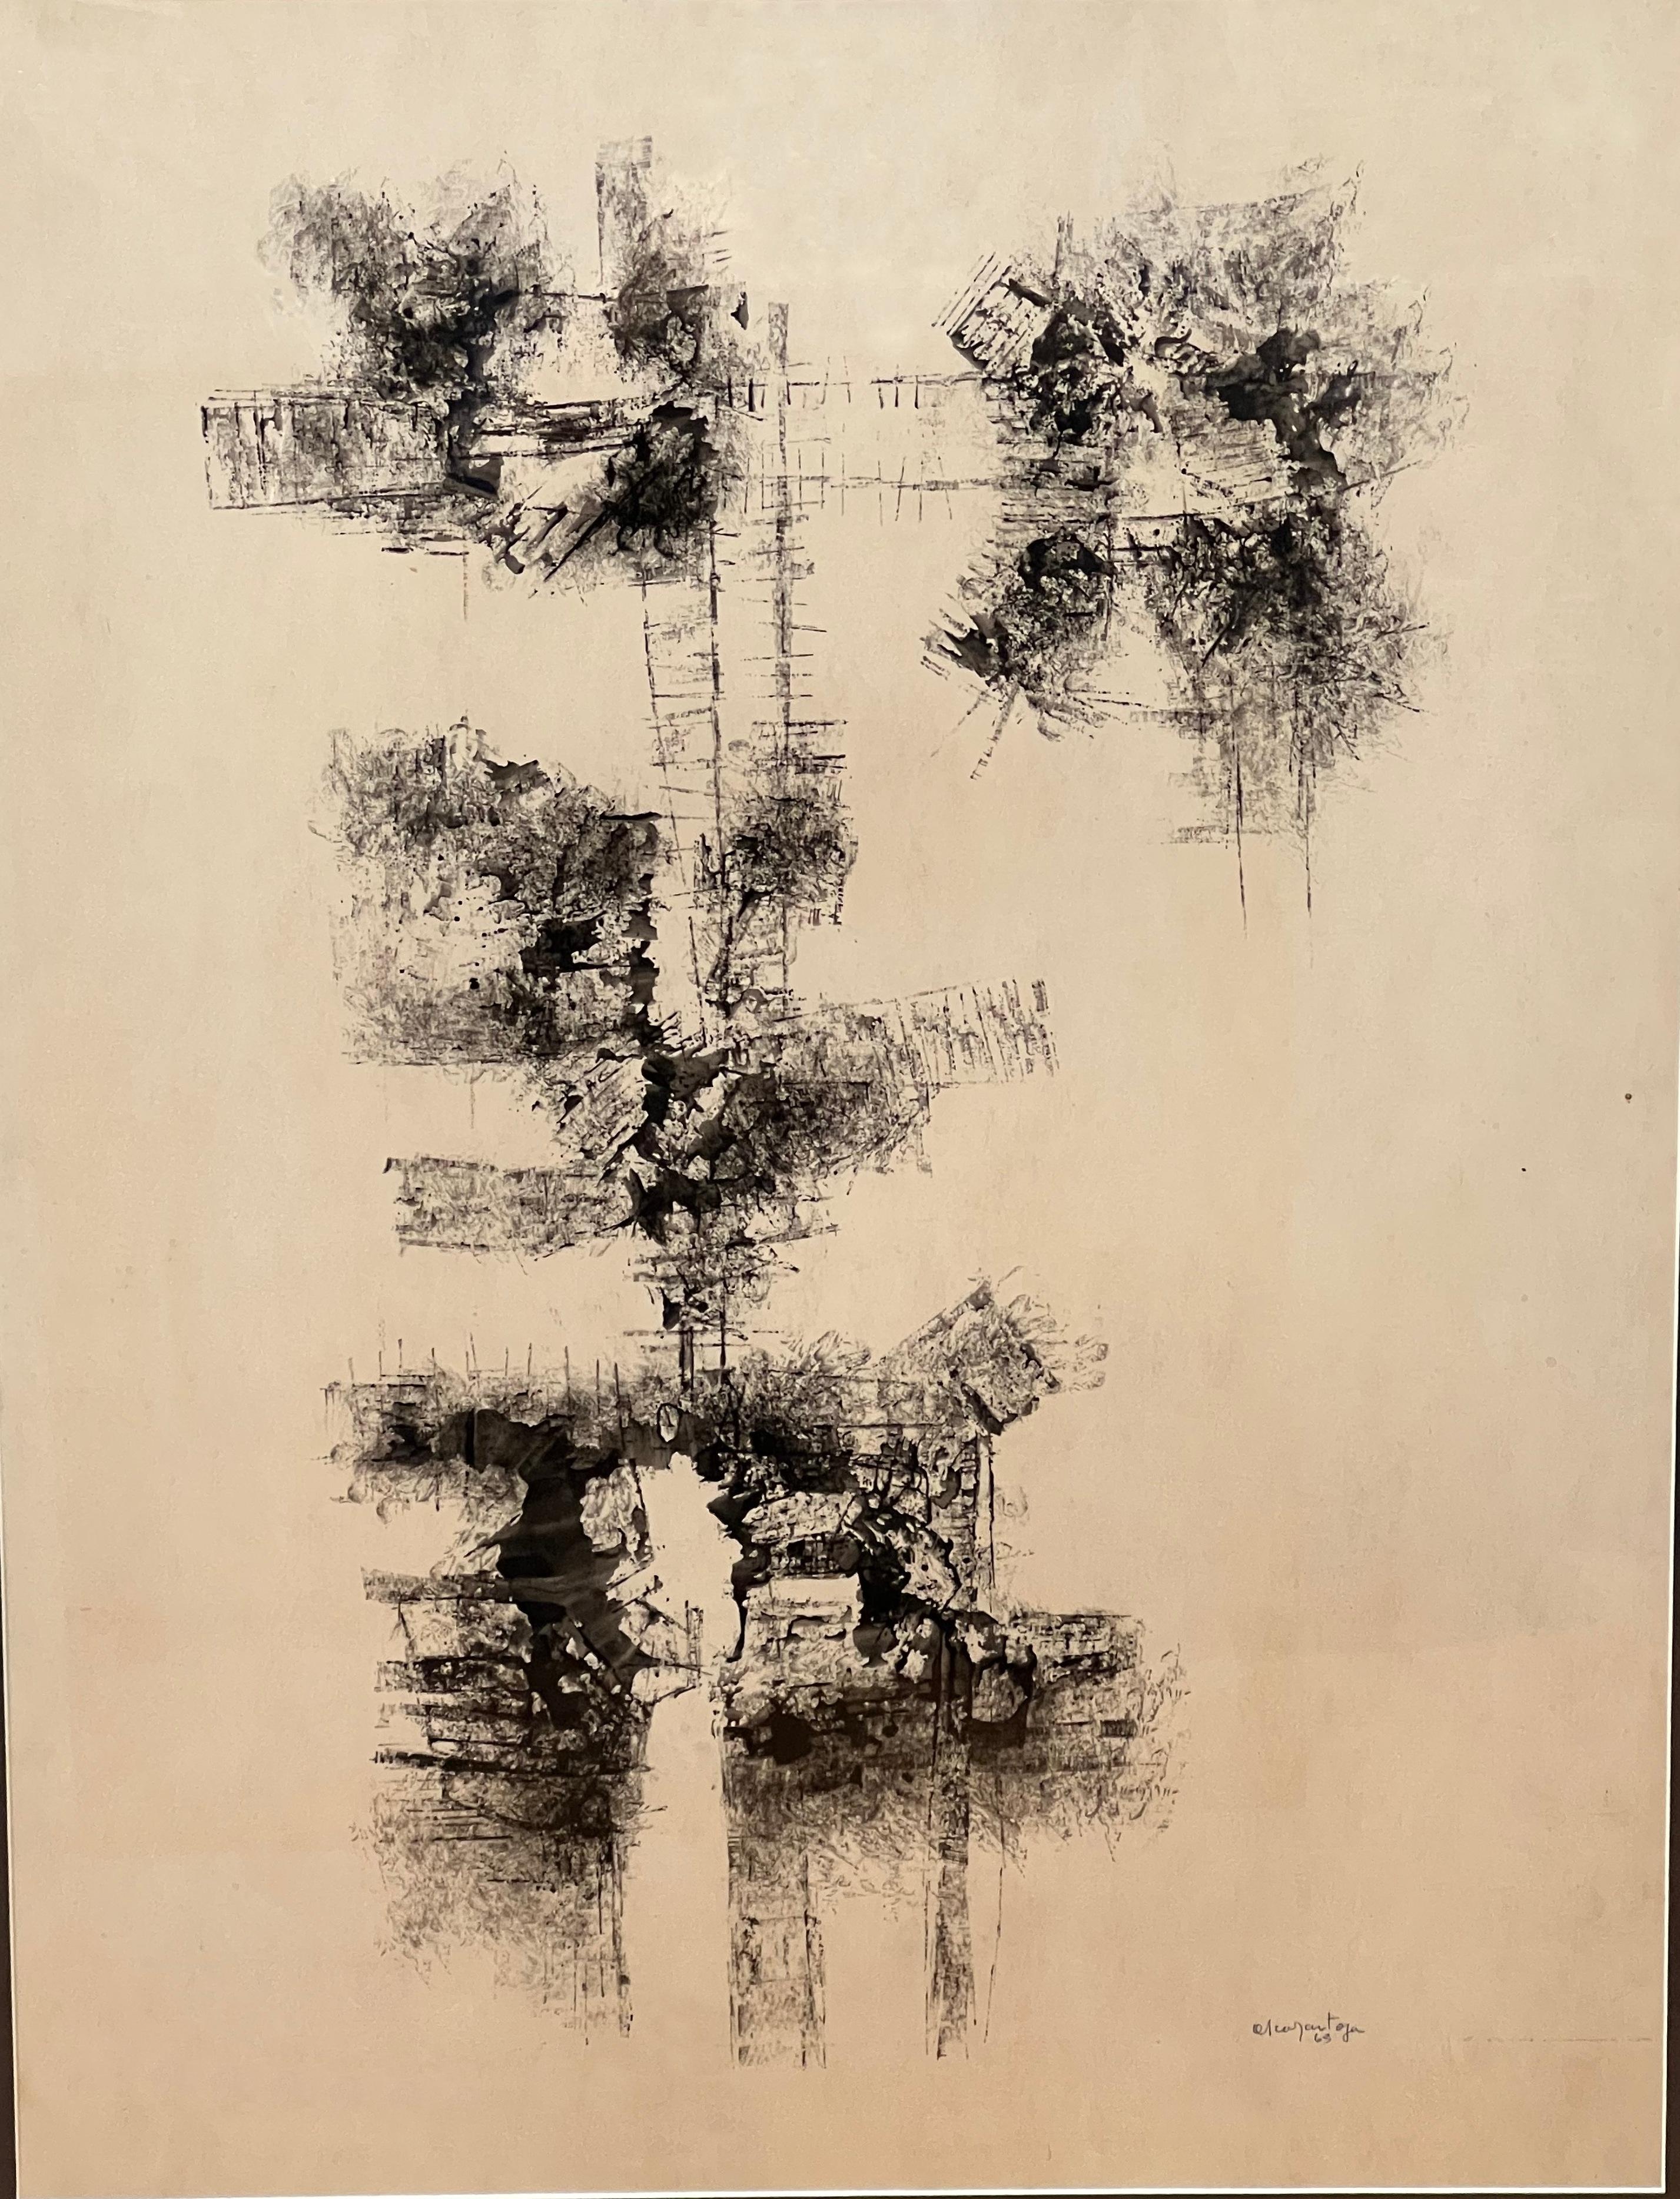 Original monochrome drawing from 1963 to be approached as a walk into a mental landscape. The painter's signature does not allow us to identify him. There is in this work a non-figuration that could almost recall enigmatic images of the Rorschach